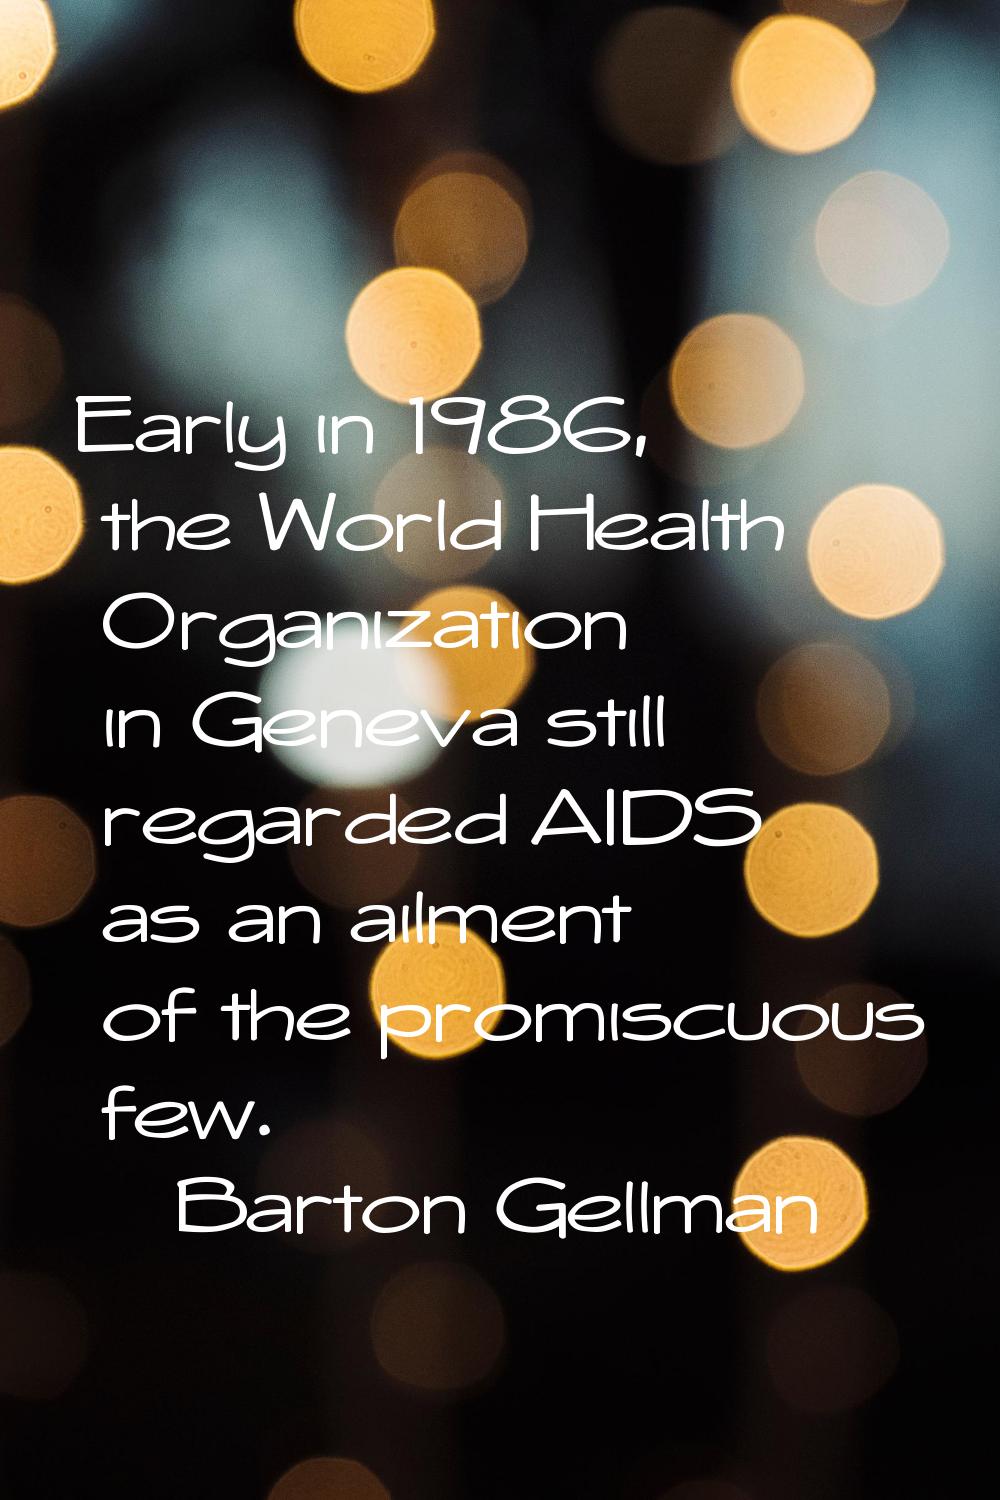 Early in 1986, the World Health Organization in Geneva still regarded AIDS as an ailment of the pro